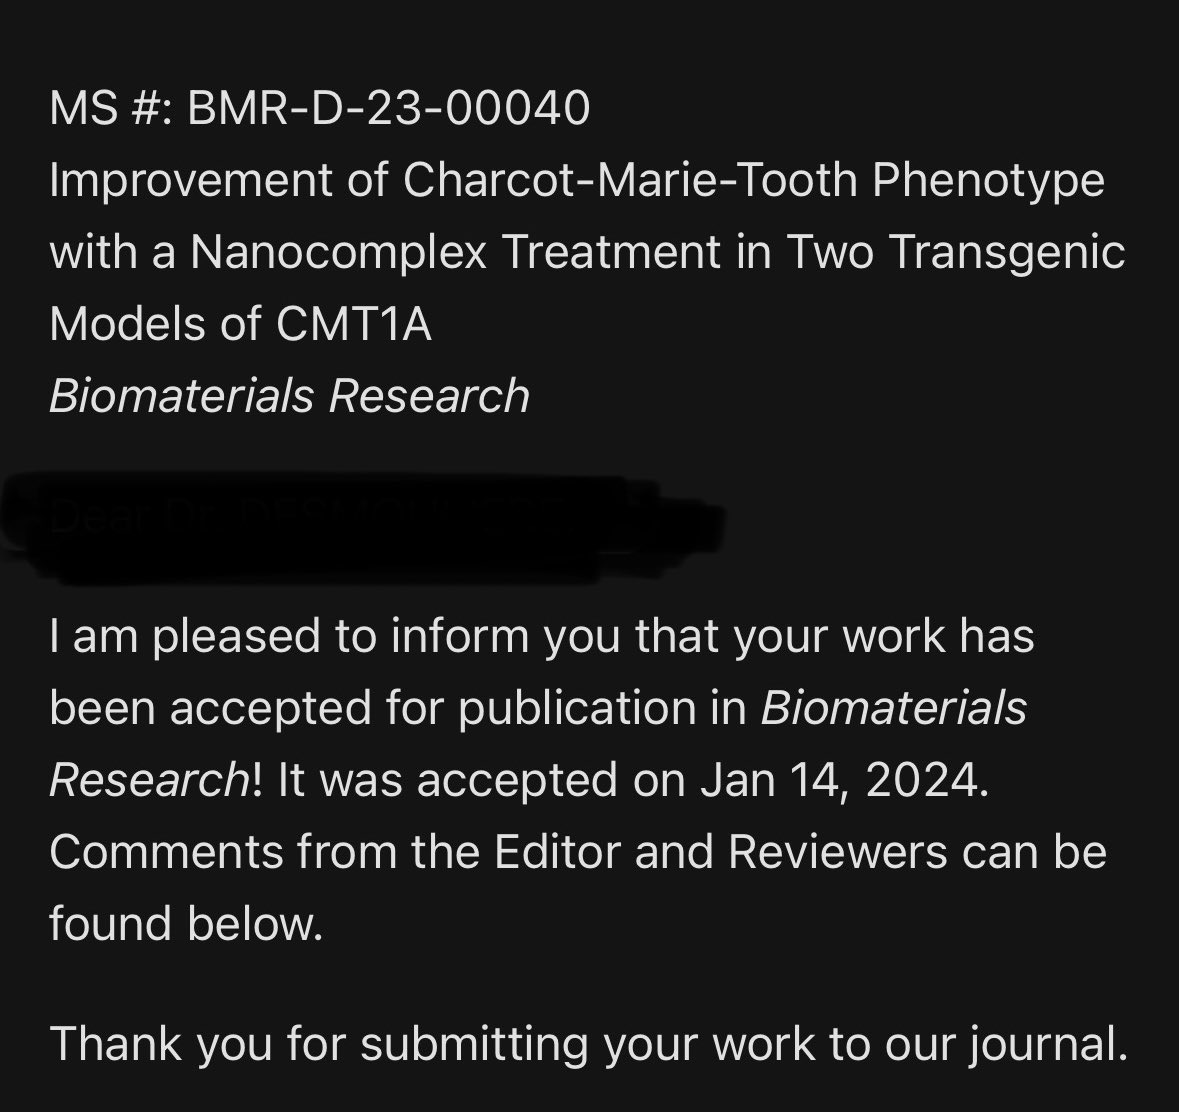 What a great end of the week! Paper accepted for publication at Biomaterials Research. Stay tuned for a closer look at the interesting results in Charcot-Marie-Tooth 1A therapy. #cmt #therapeutics #neuropathy #cmt1a #geneticdisorders #nanotechnology #cmtr #cmta